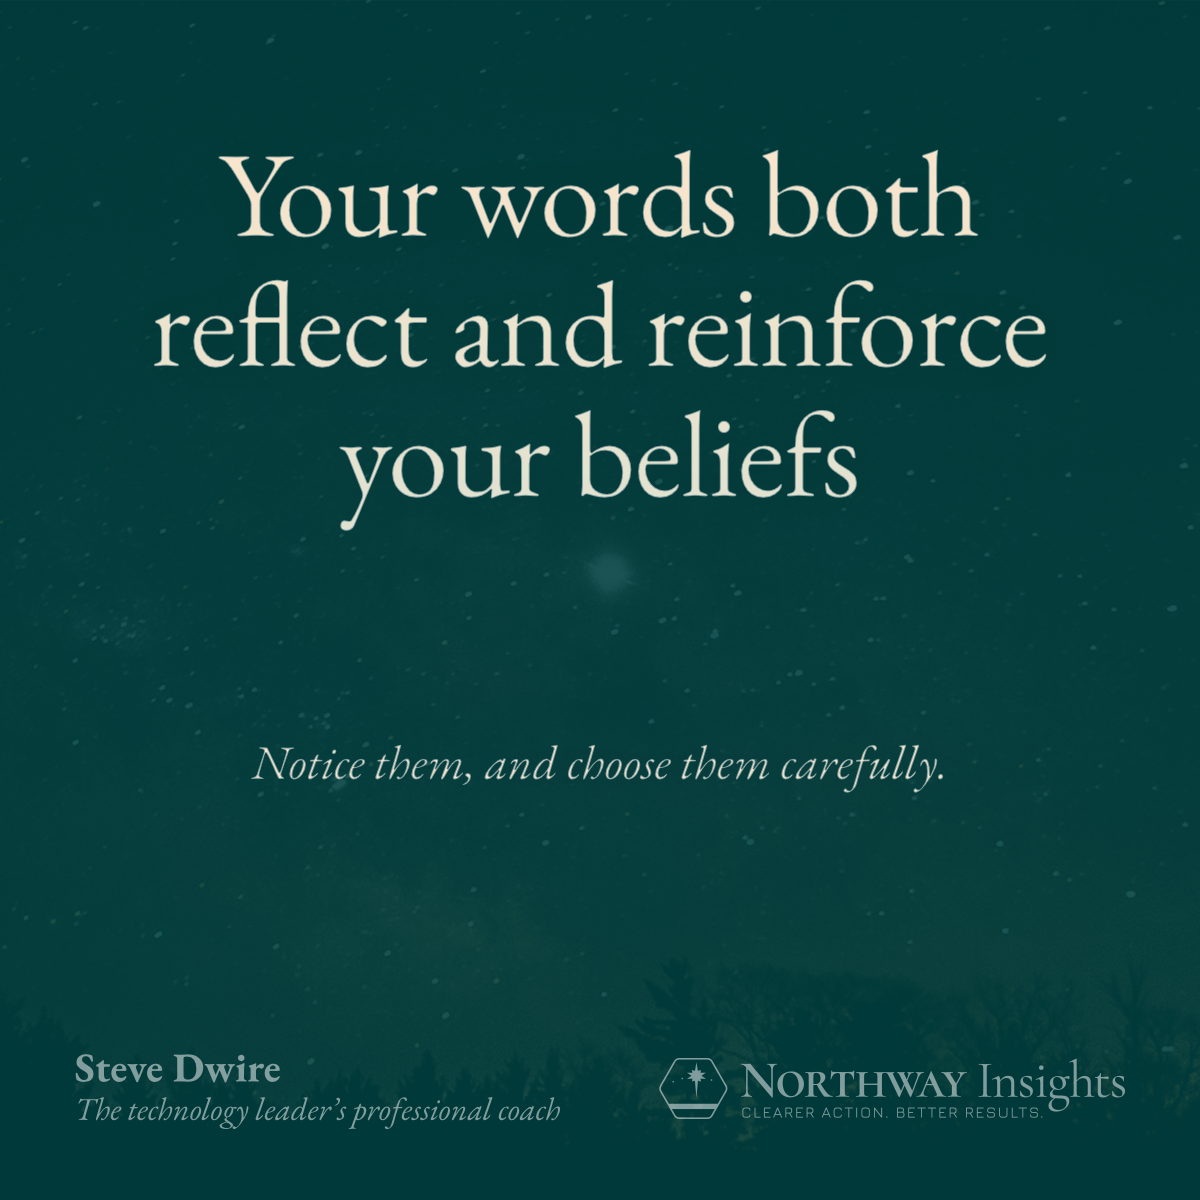 Your words both reflect and reinforce your beliefs. (Notice them, and choose them carefully.)